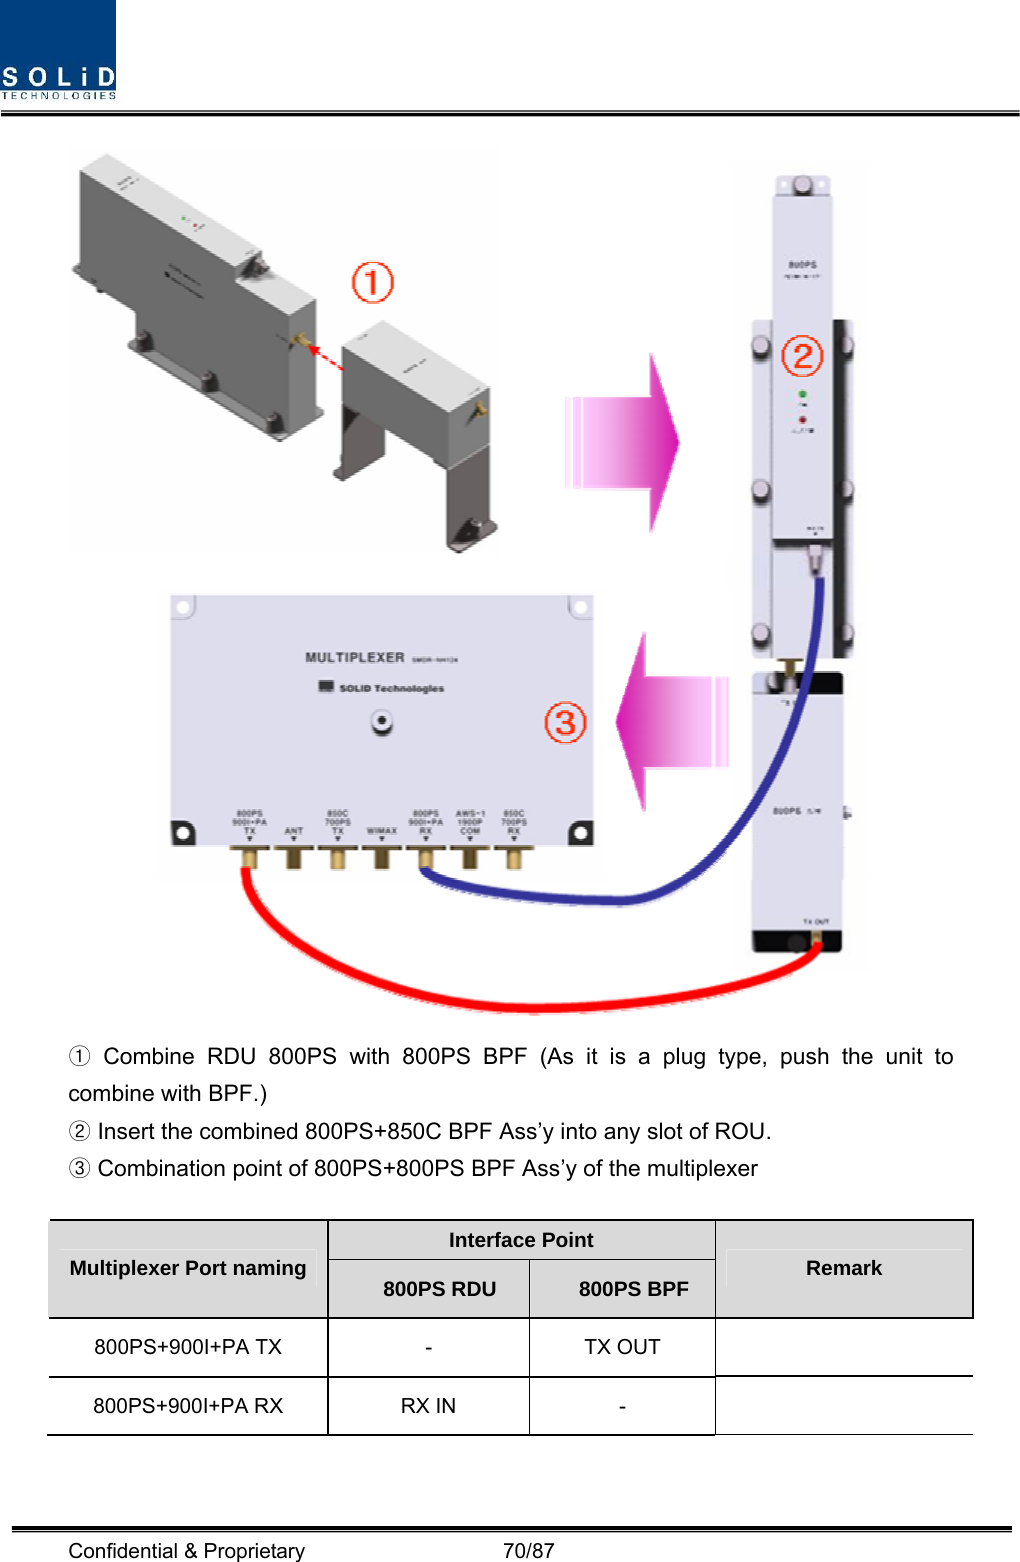  Confidential &amp; Proprietary                   70/87   Combine ①RDU 800PS with 800PS BPF (As it is a plug type, push the unit to combine with BPF.)  In②sert the combined 800PS+850C BPF Ass’y into any slot of ROU.  Combination point of 800PS+800PS BPF Ass’y of the multiplexer③  Interface Point Multiplexer Port naming  800PS RDU  800PS BPF  Remark 800PS+900I+PA TX  -  TX OUT   800PS+900I+PA RX  RX IN  -    